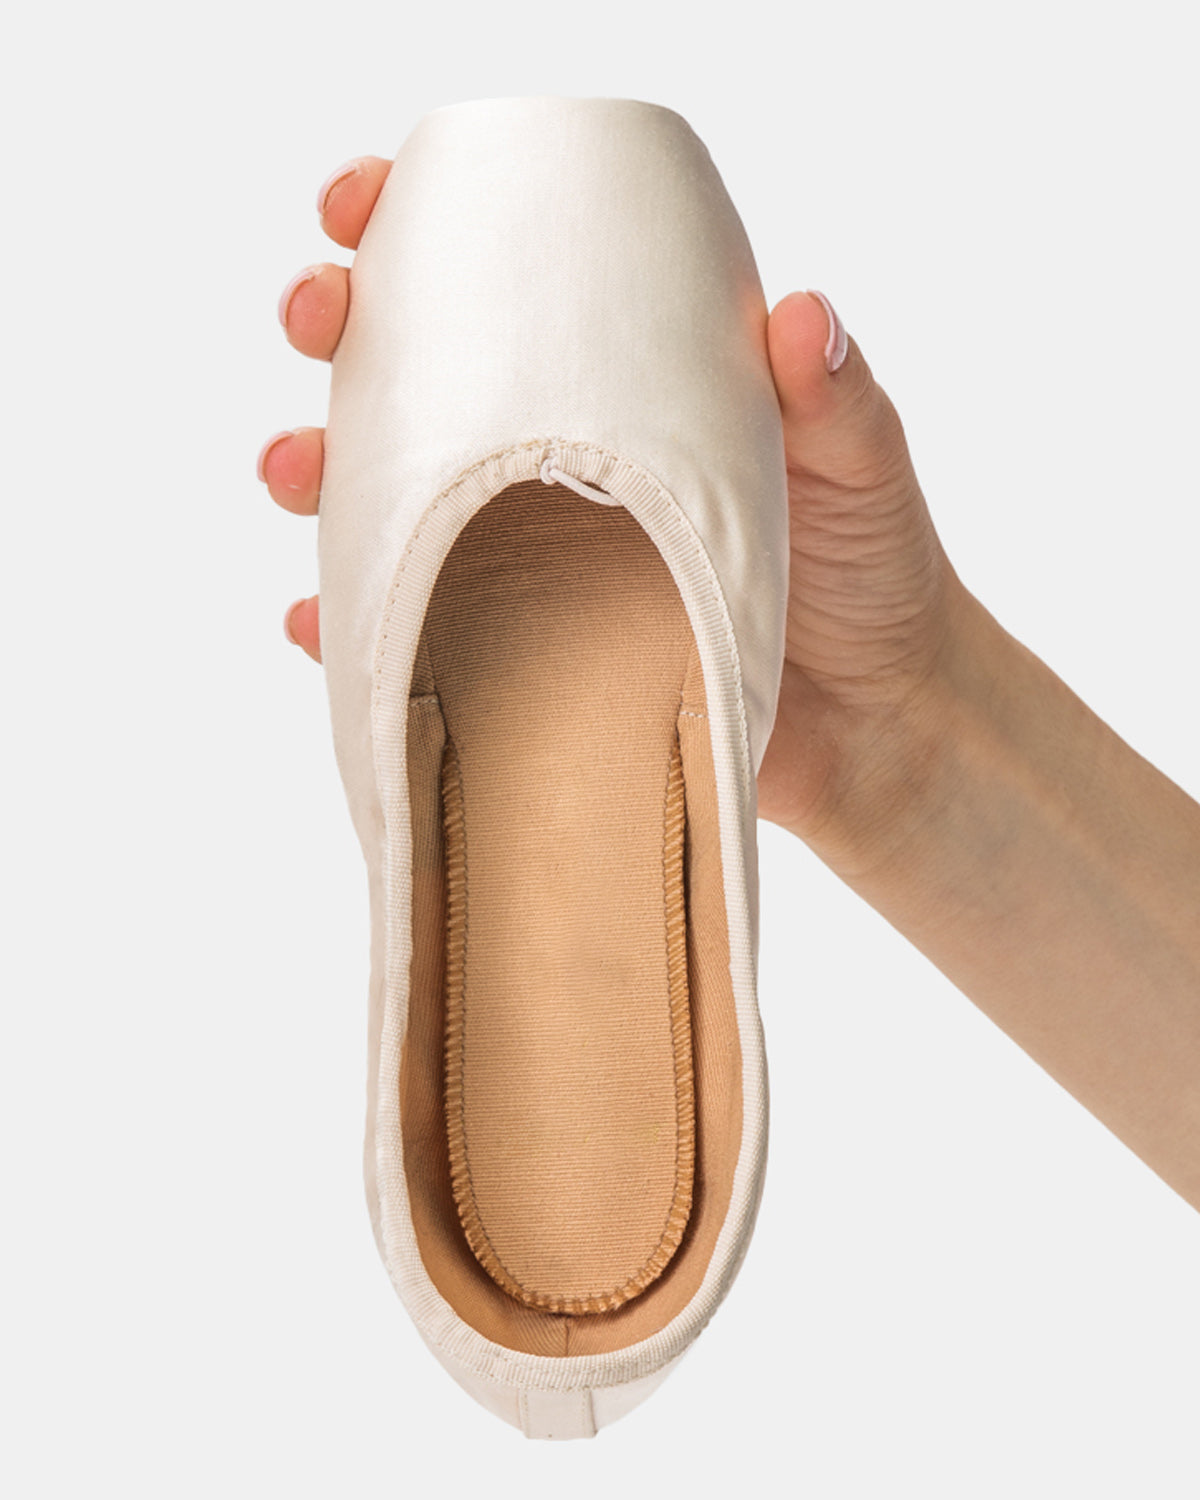 questions about pointe shoes